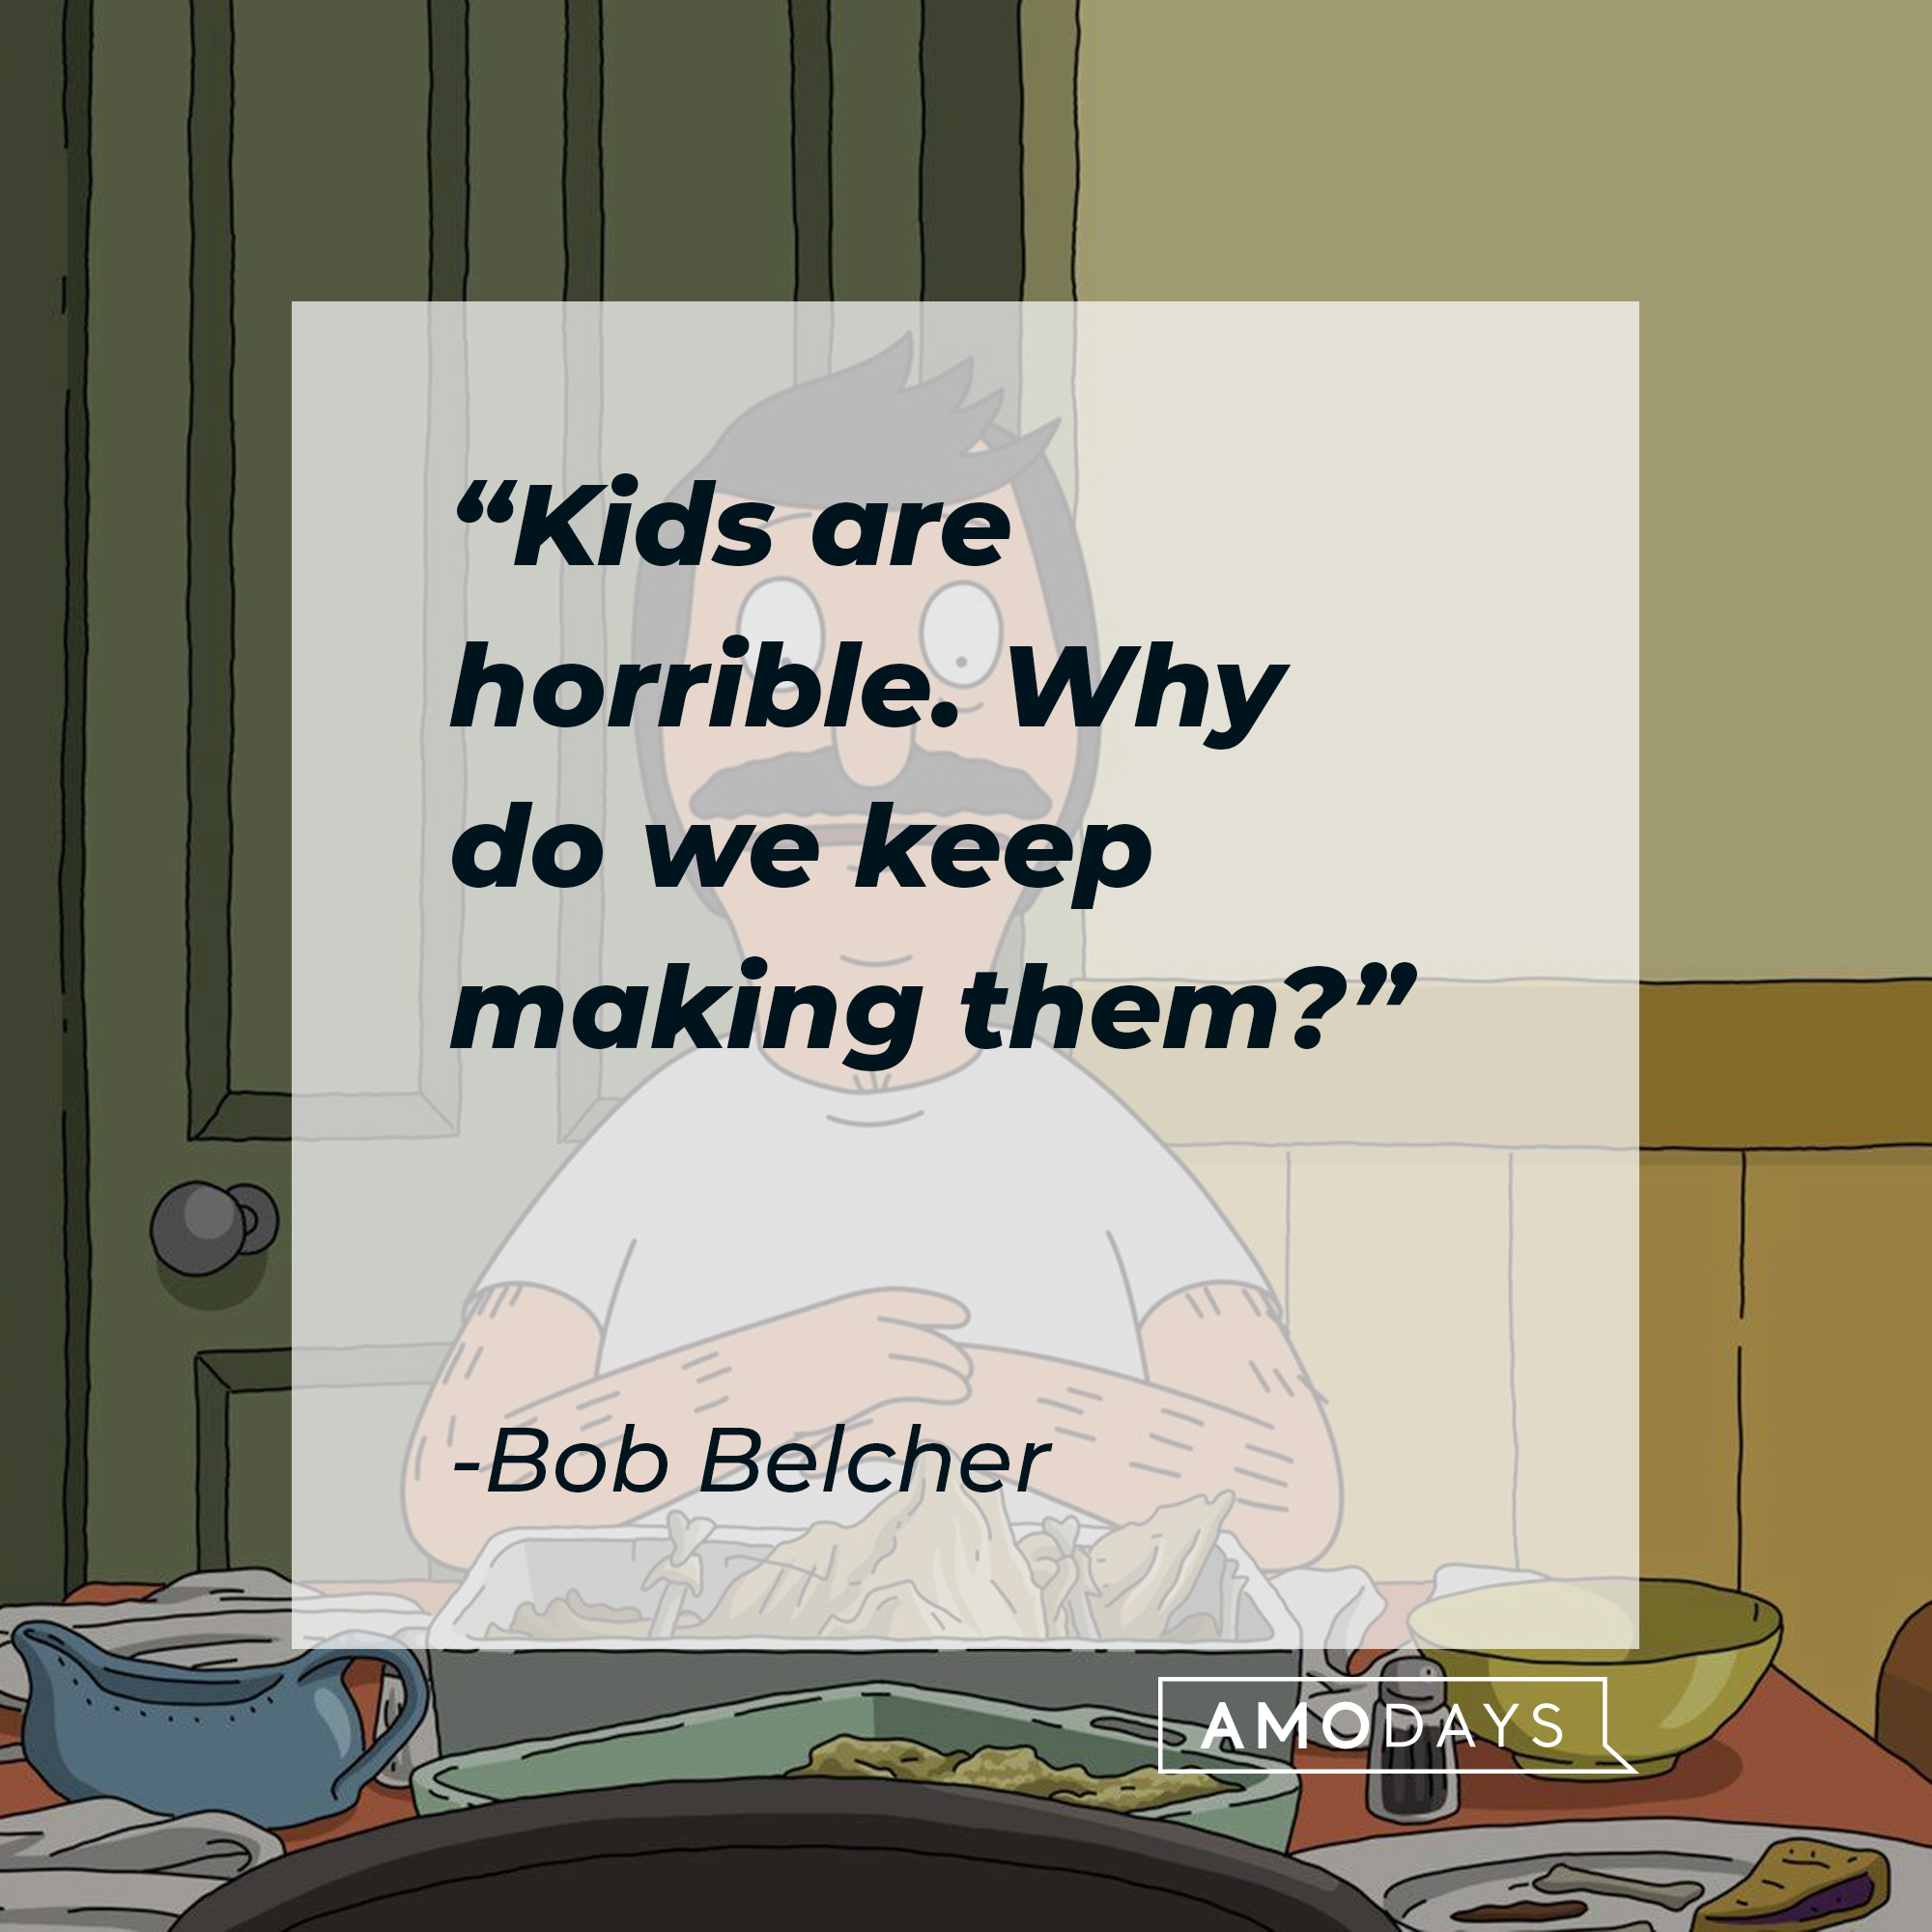 An image of Bob Belcher, with his quote: "Kids are horrible. Why do we keep making them?" | Source: Facebook.com/BobsBurgers